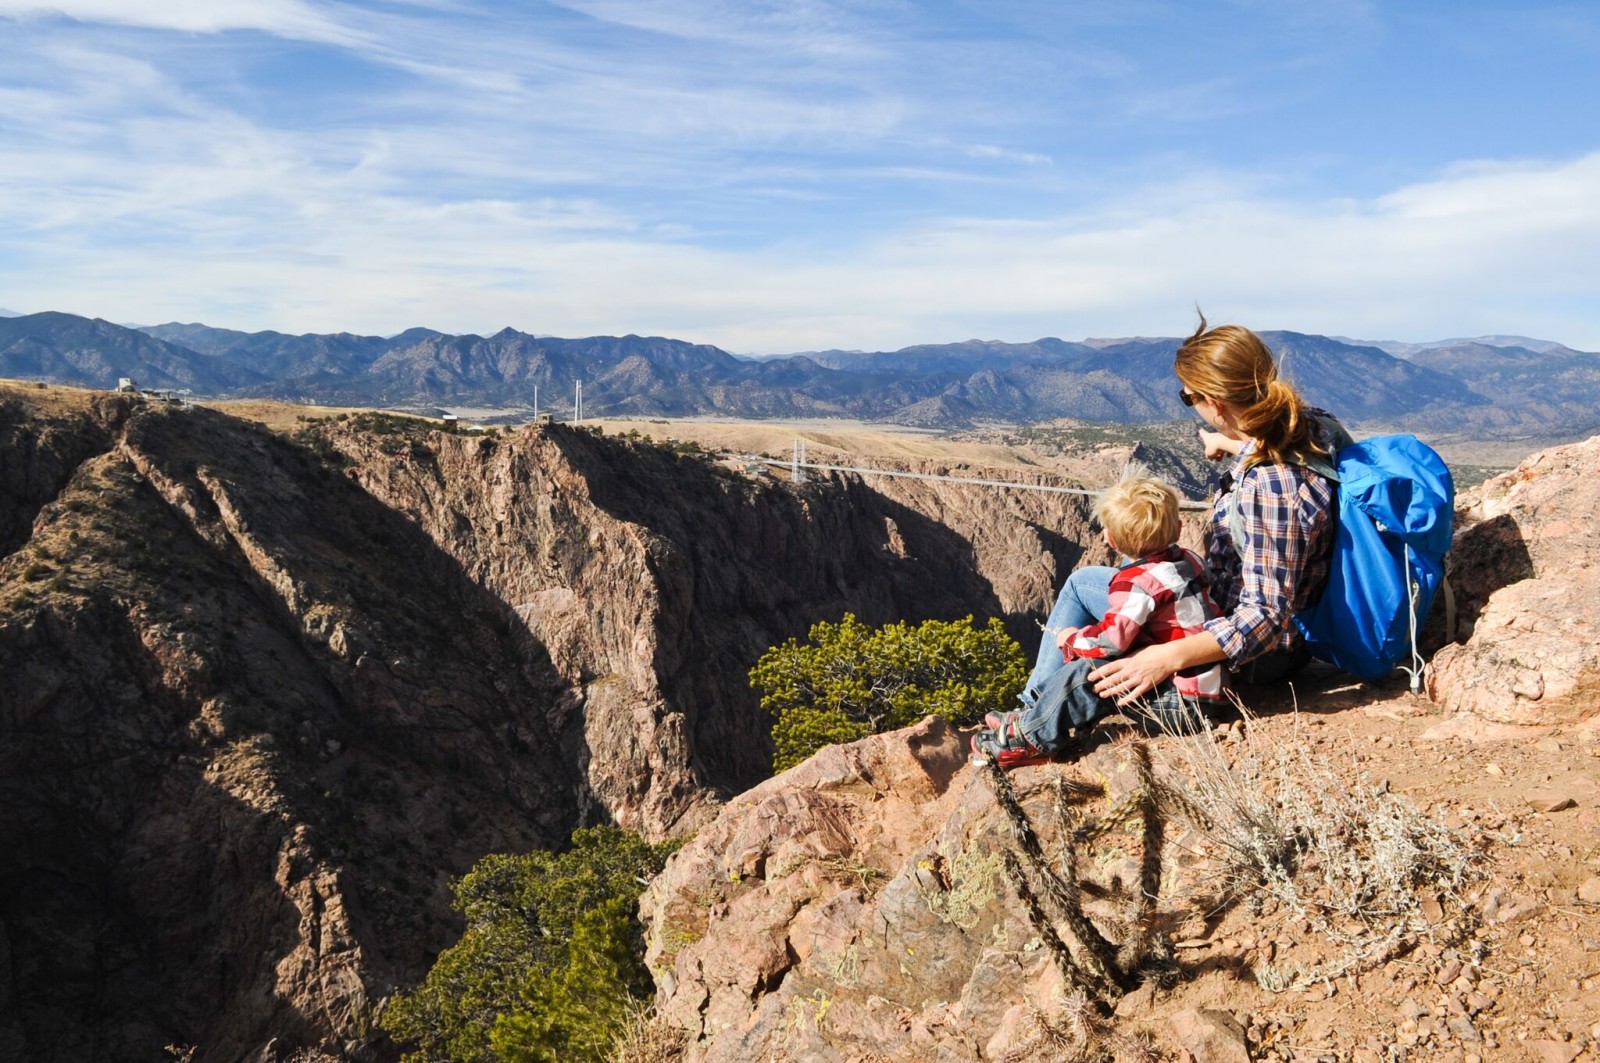 Mother and Child Exploring the Royal Gorge Region